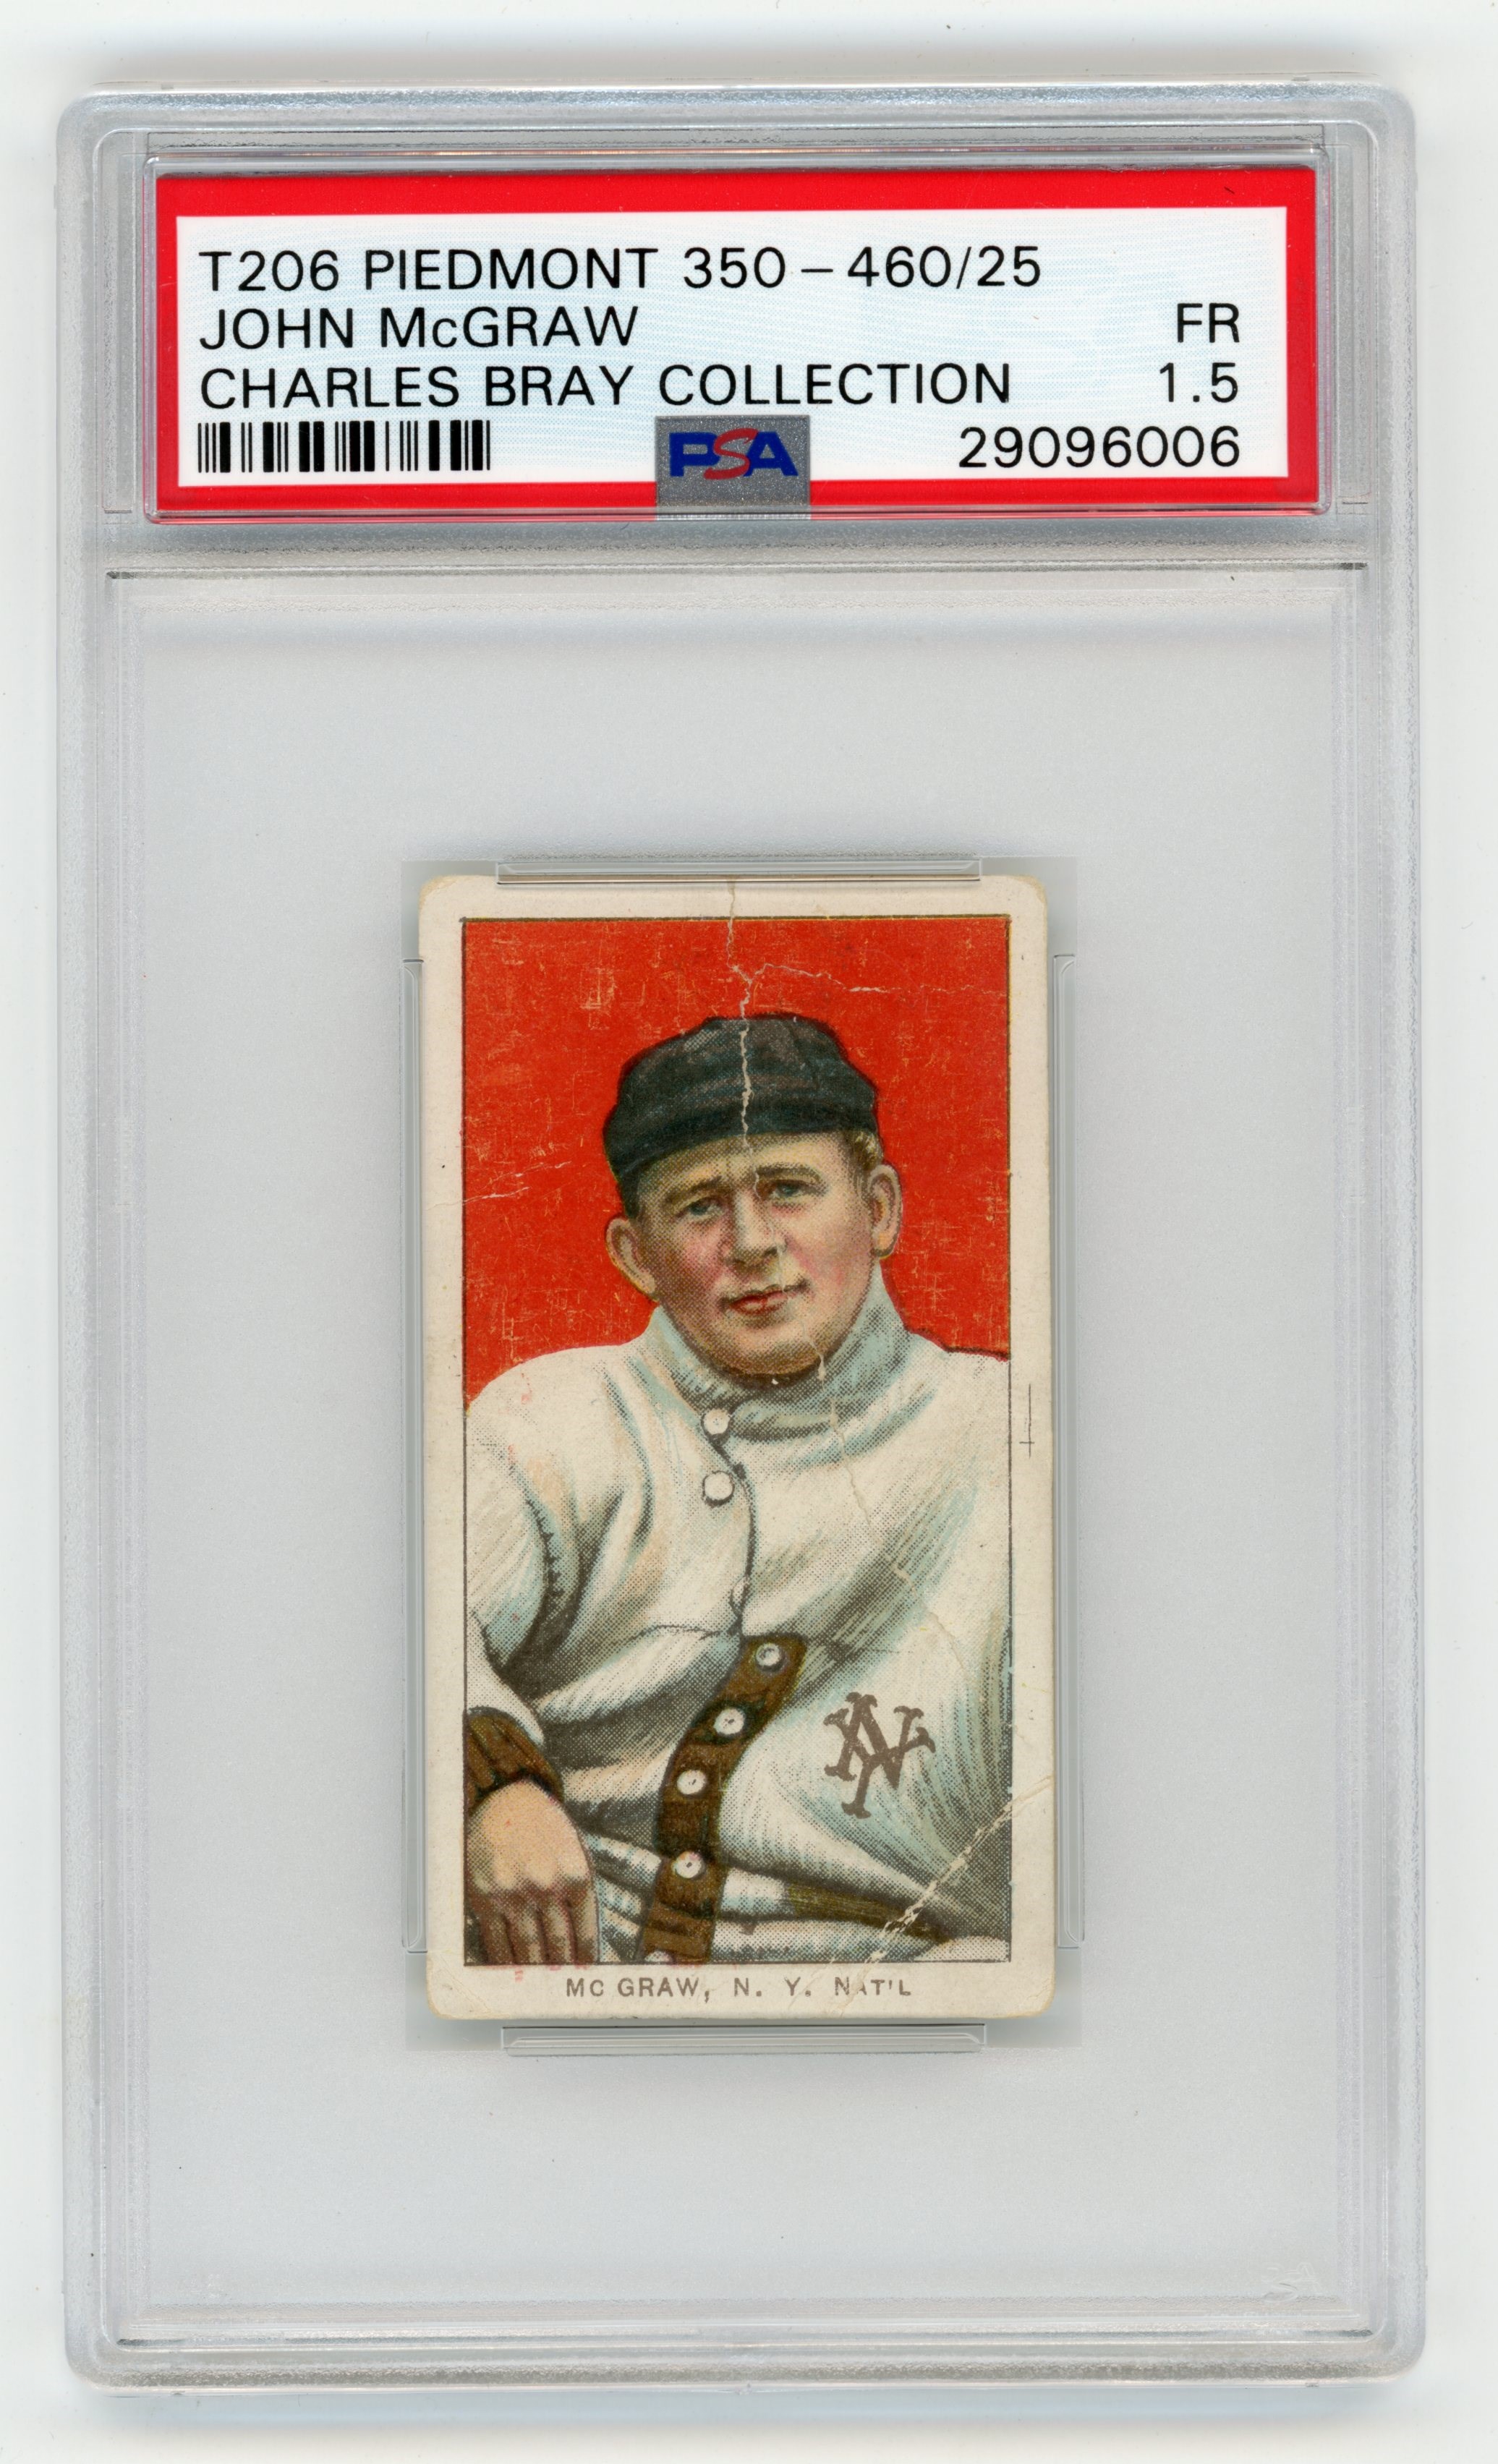 T206 Piedmont 350-460/25 John McGraw PSA 1.5 From Charles Bray Collection